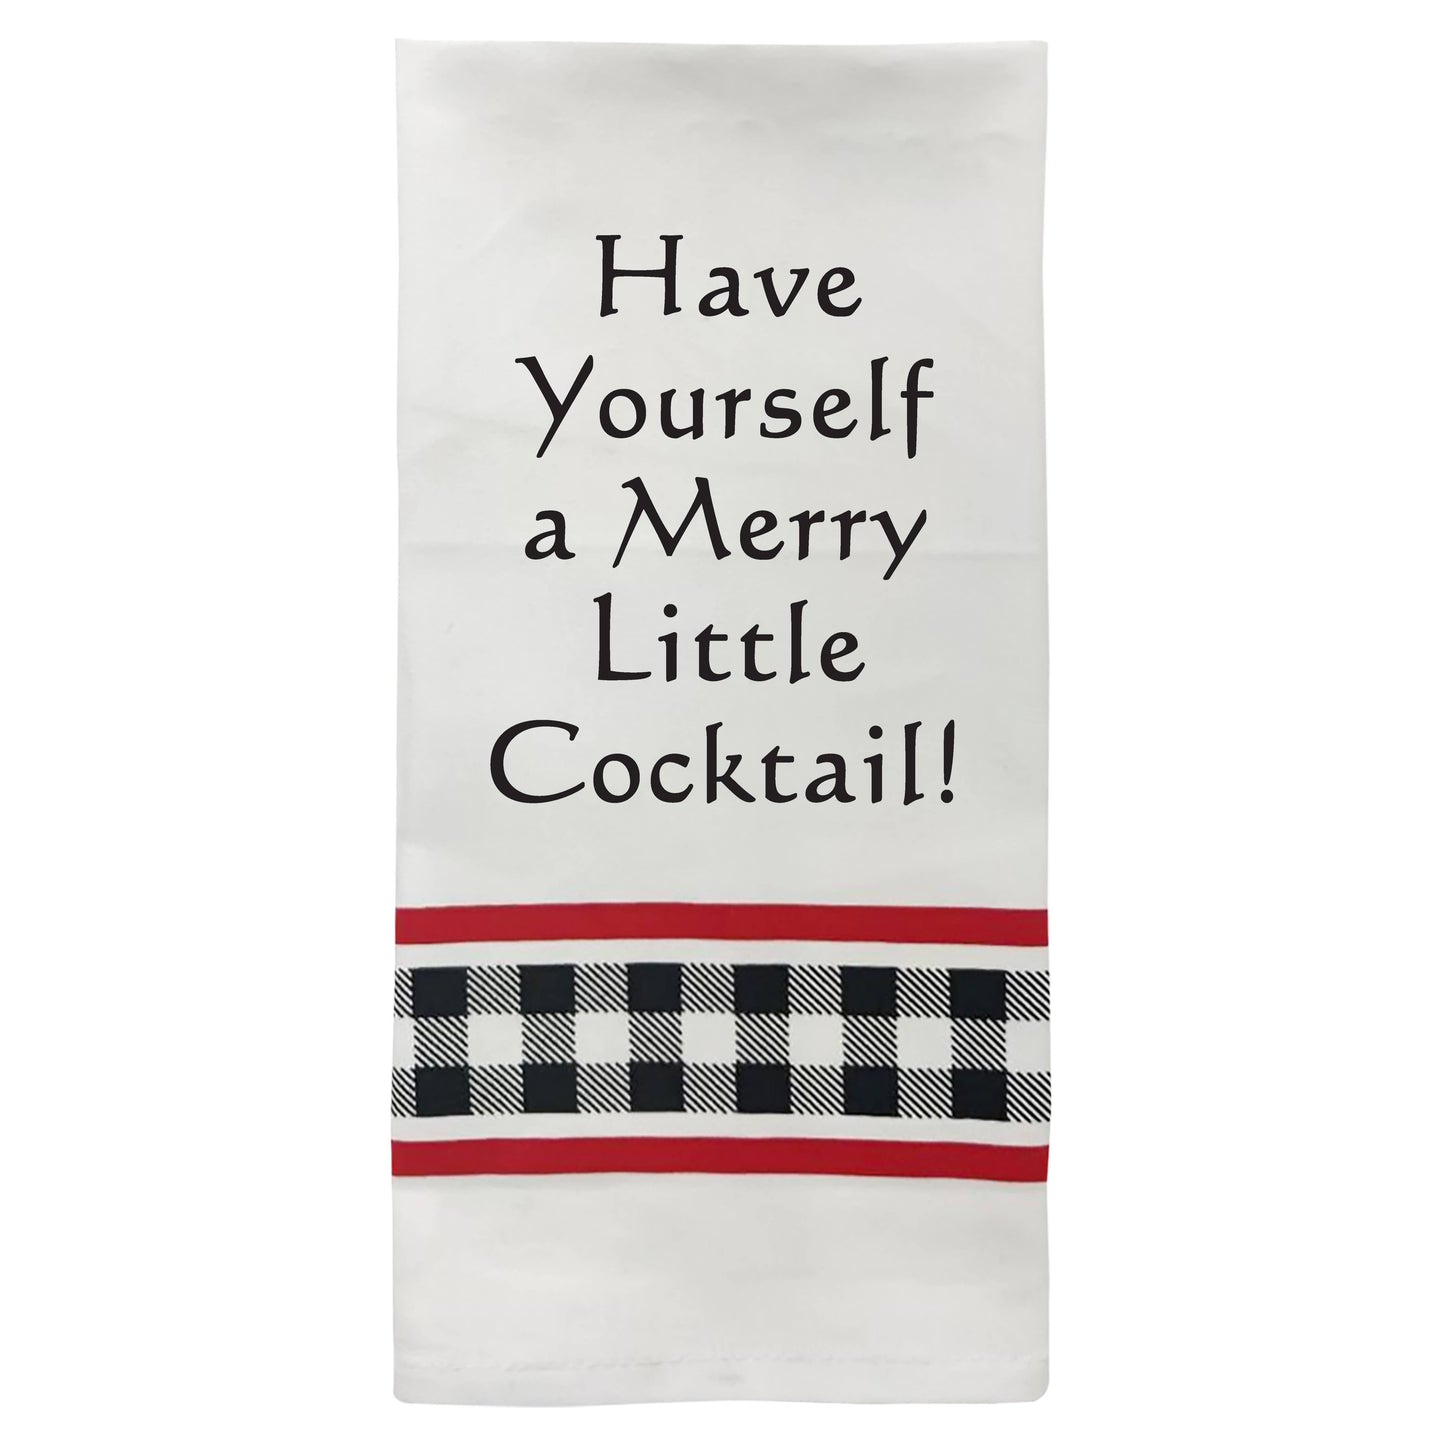 Have Yourself a Merry Little Cocktail Tea Towel